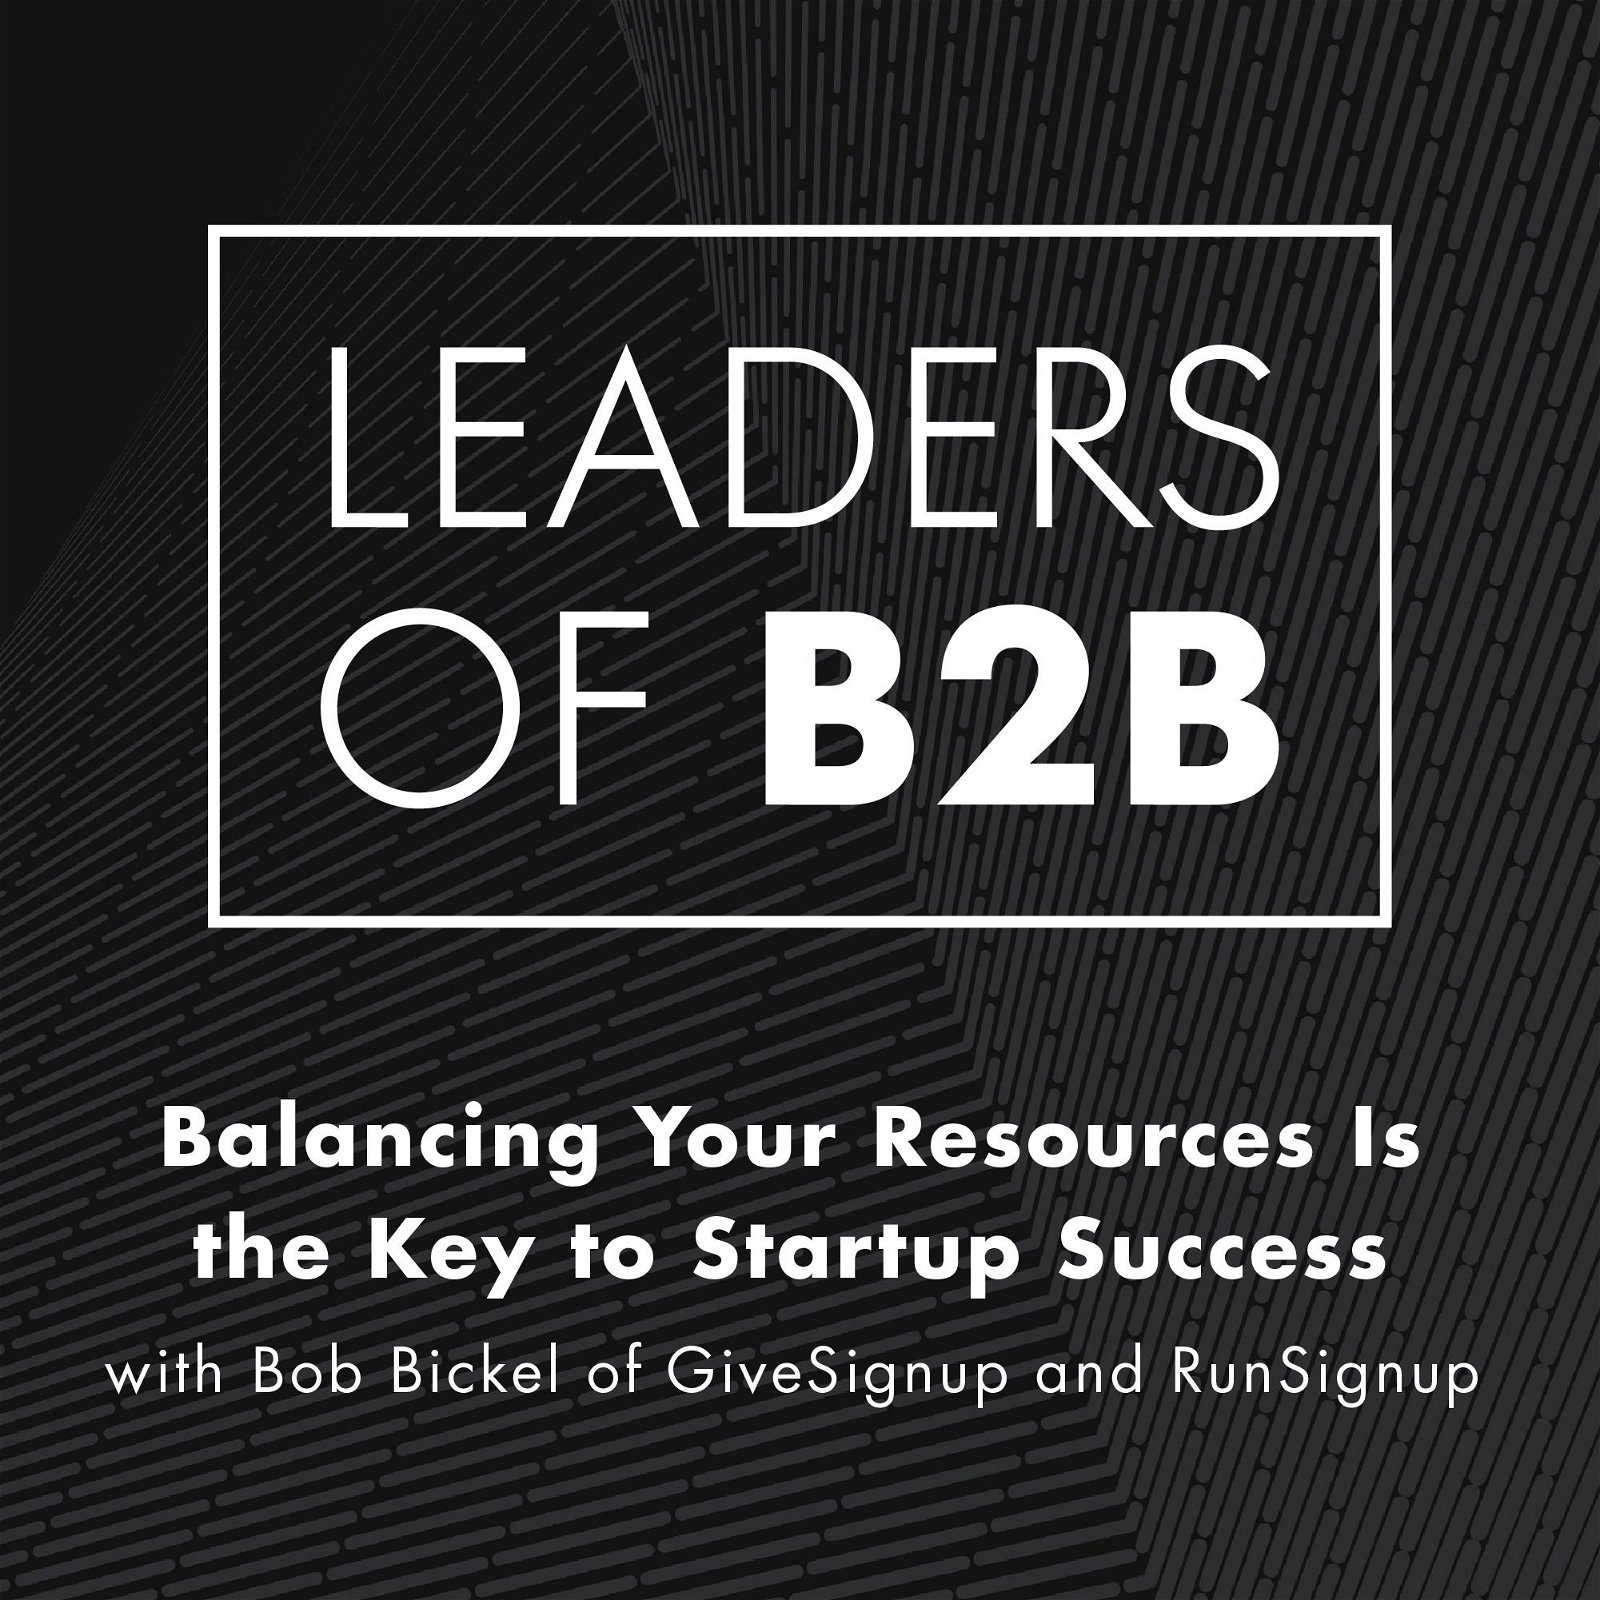 Balancing Your Resources Is the Key to Startup Success with Bob Bickel of GiveSignup and RunSignup